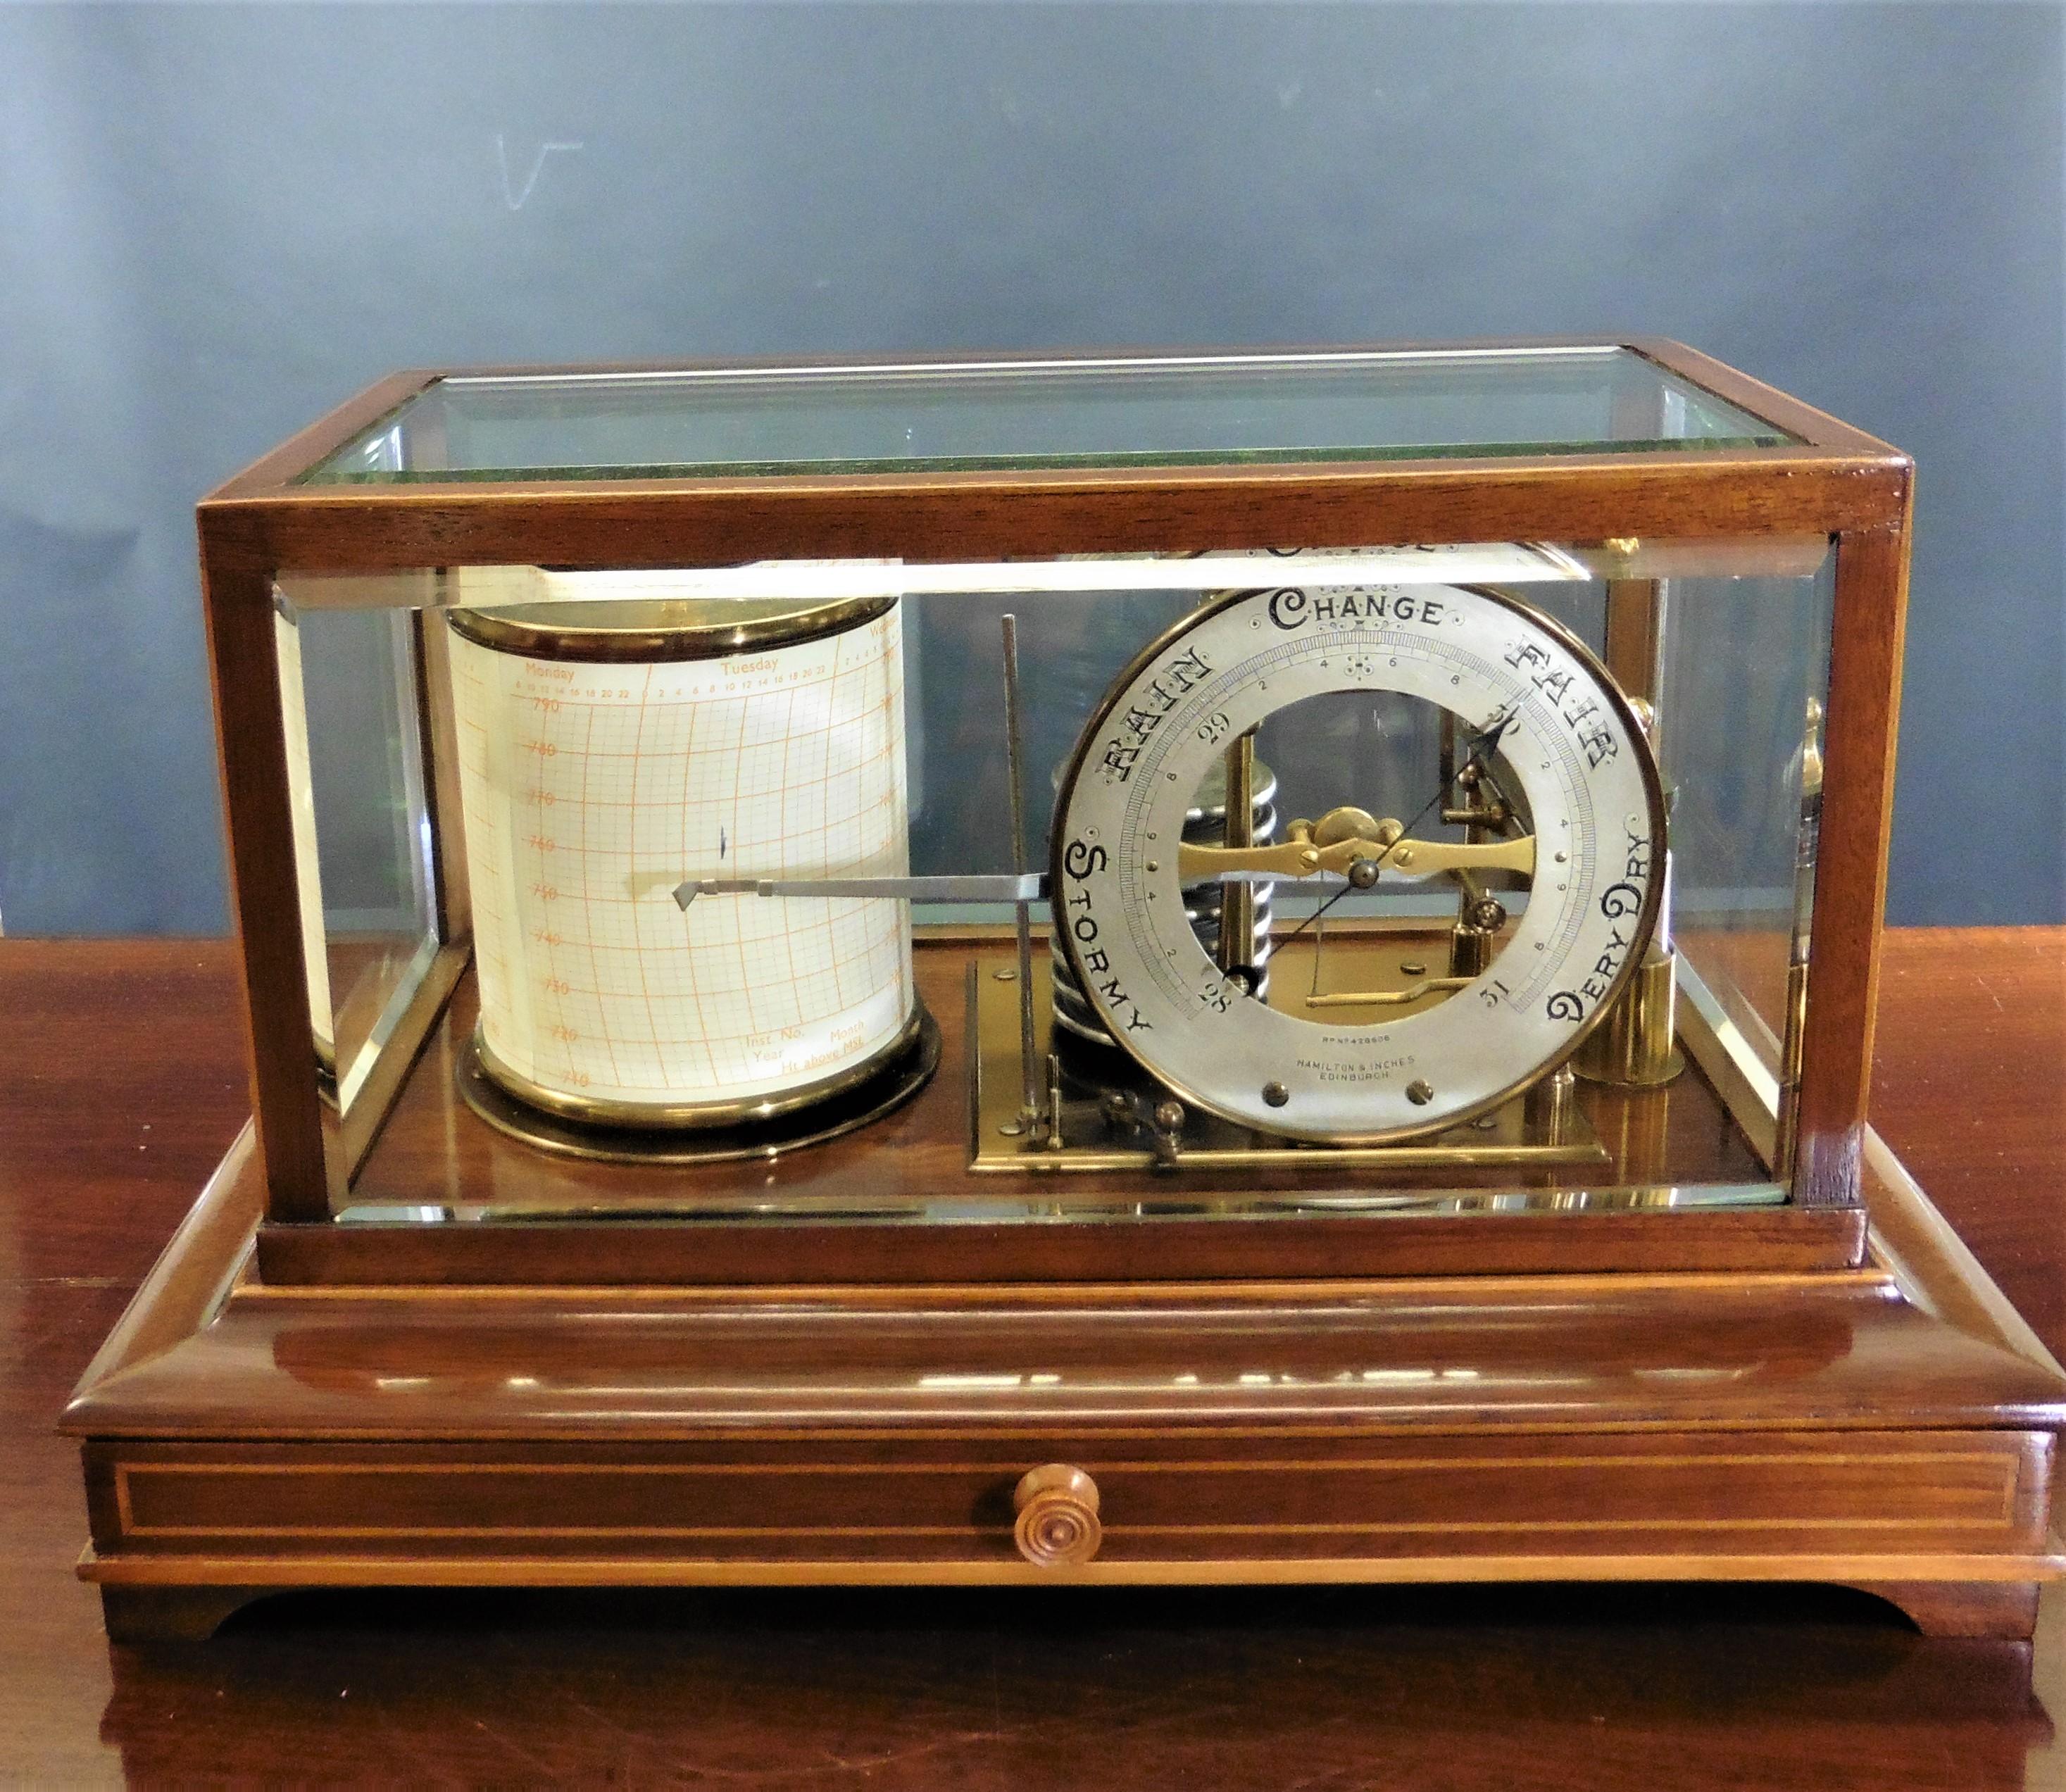 Edwardian Mahogany Barograph by Hamilton and Inches, Edinburgh


Edwardian mahogany Barograph housed in a bevelled glass display case with satinwood line inlay, standing on a raised, moulded plinth and resting on four pad feet.

Eight vacuum